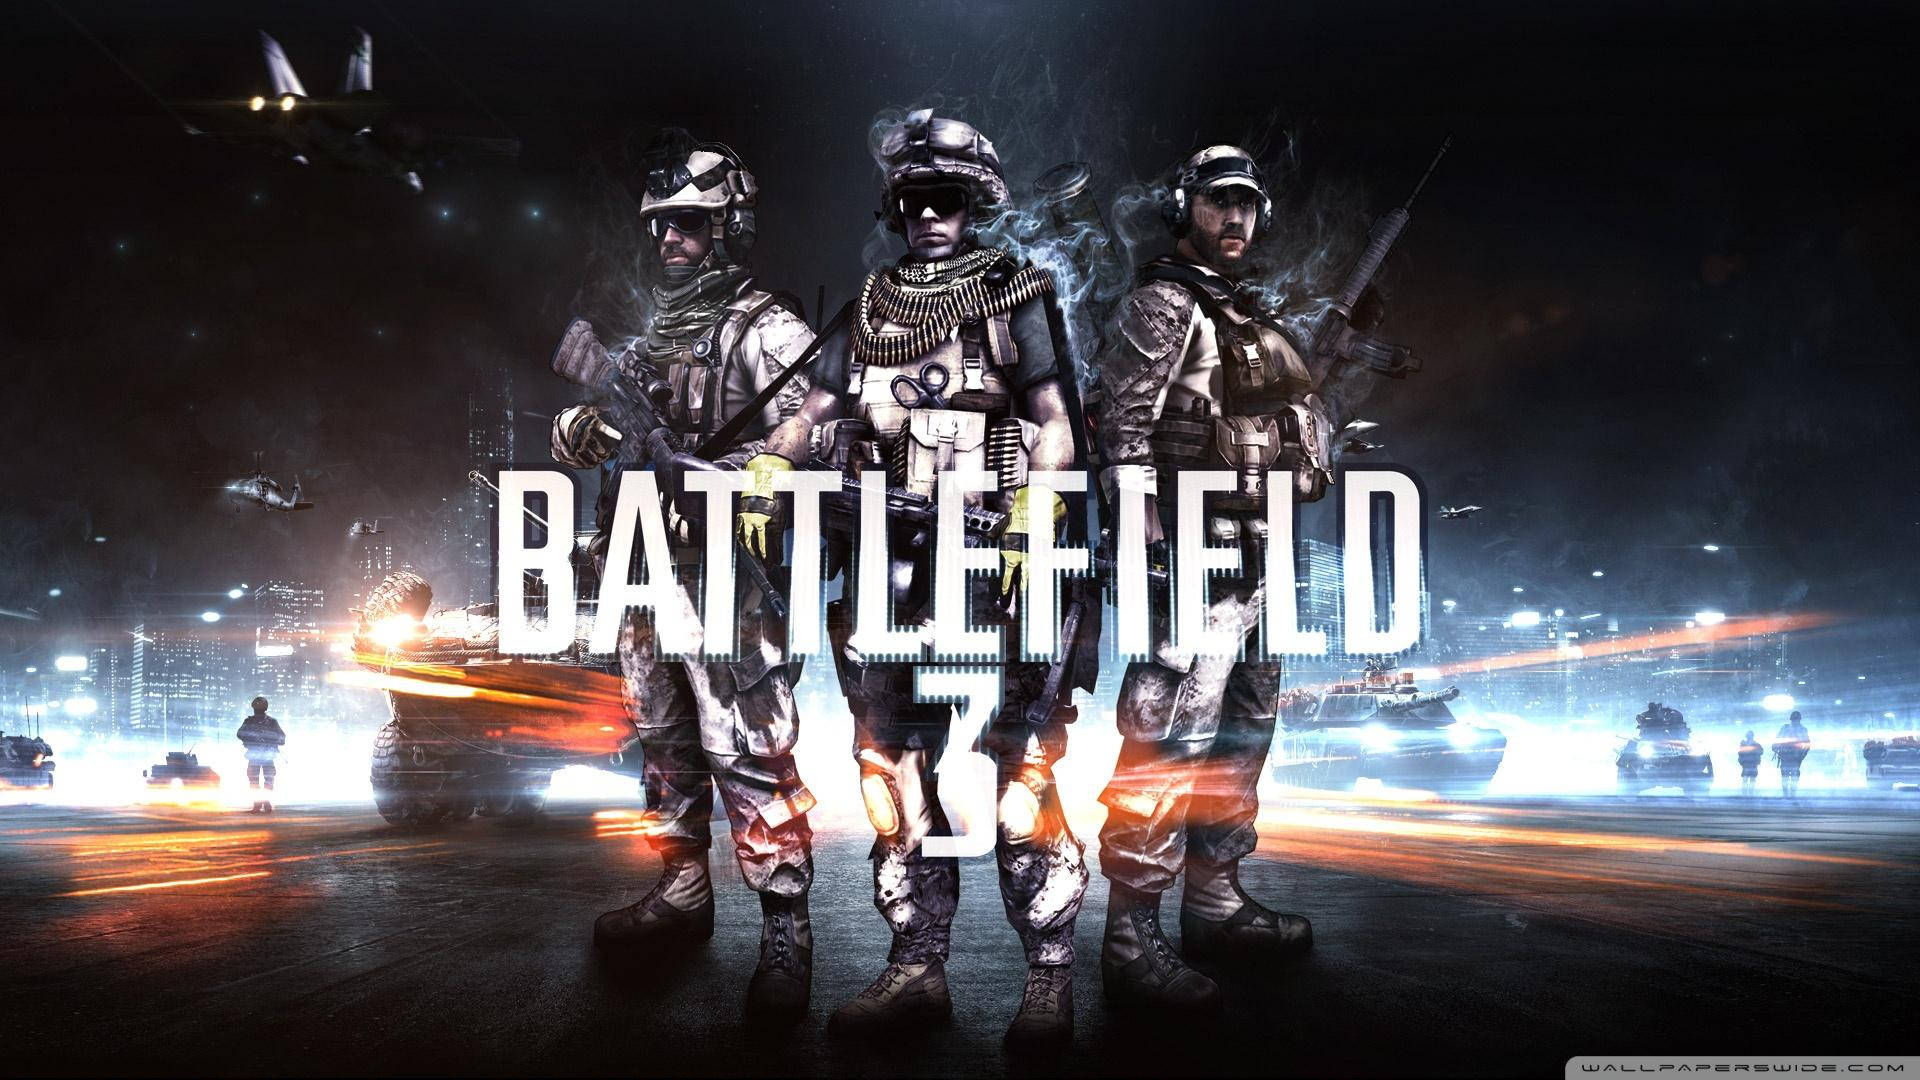 Battlefield 3 Characters Poster